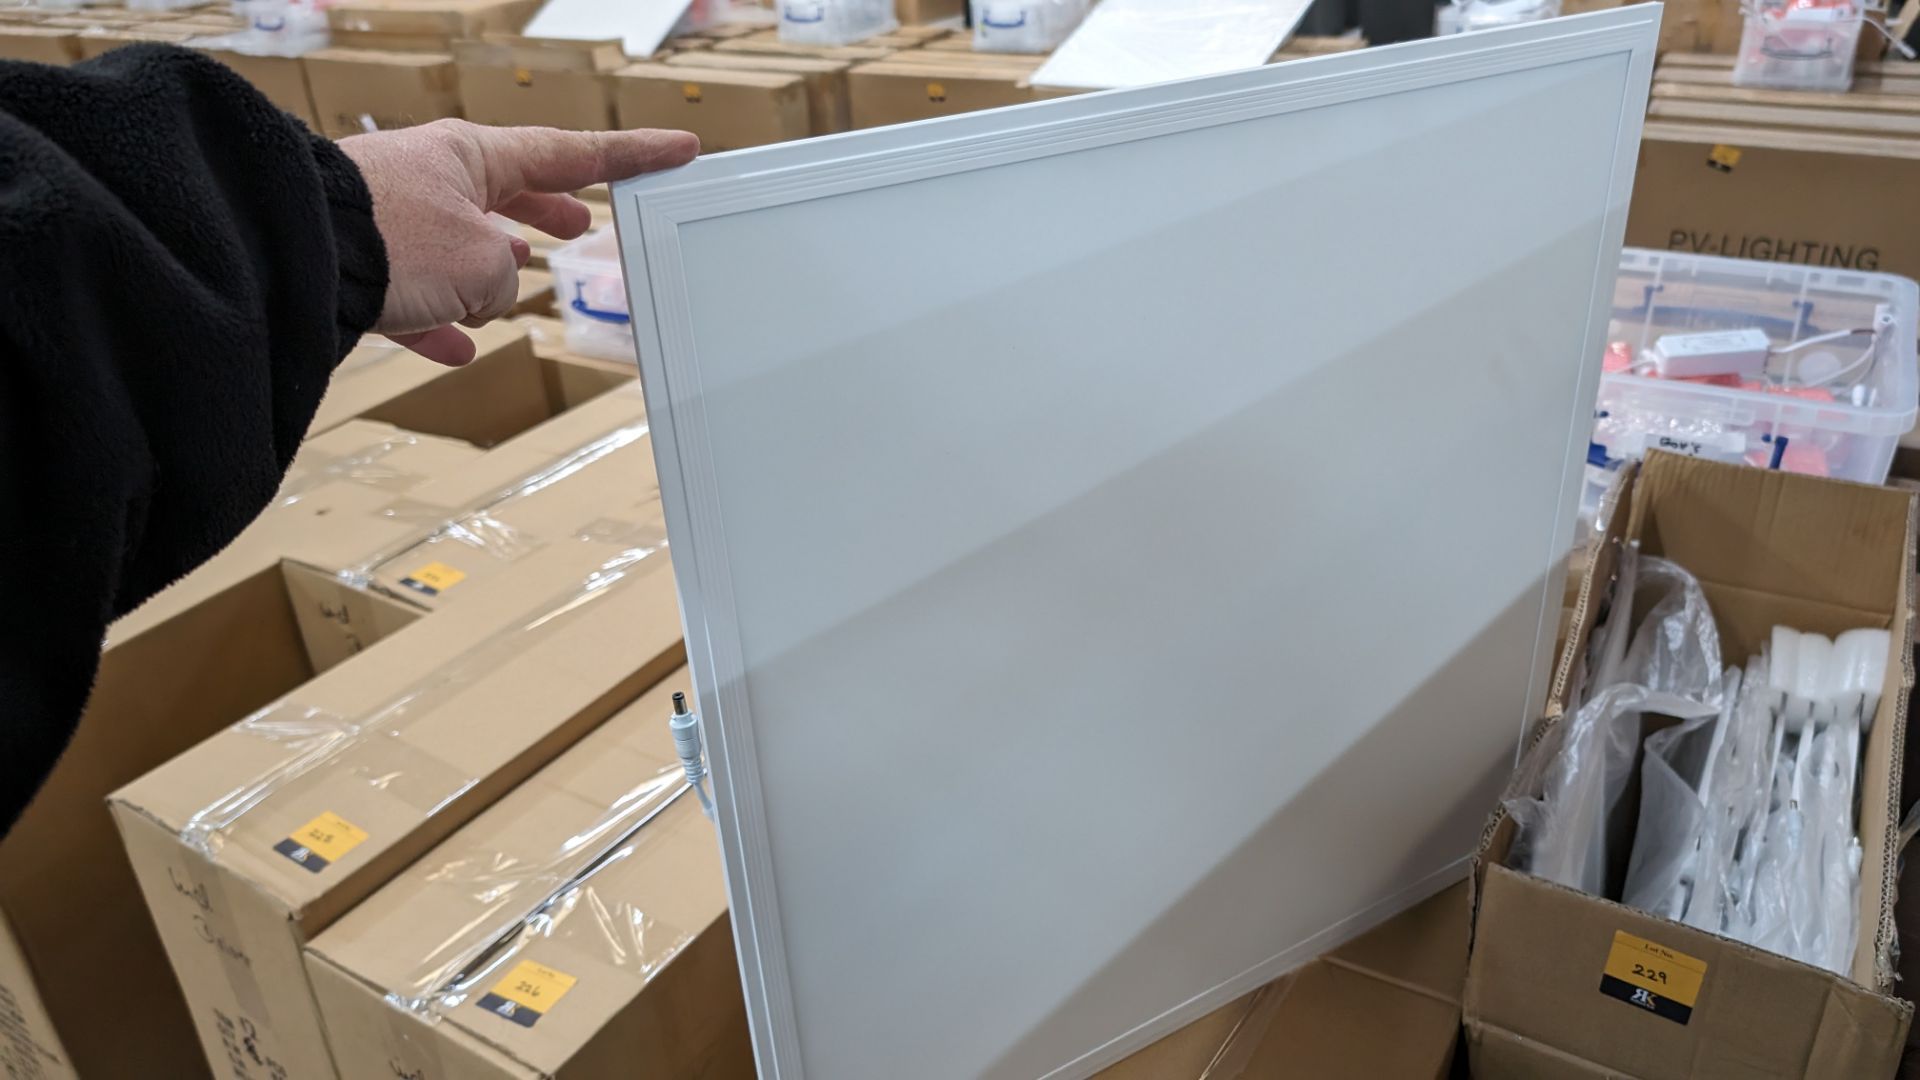 8 off 595mm x 595mm 4000k 45w LED lighting panels, each including driver - 1 carton - Image 3 of 5